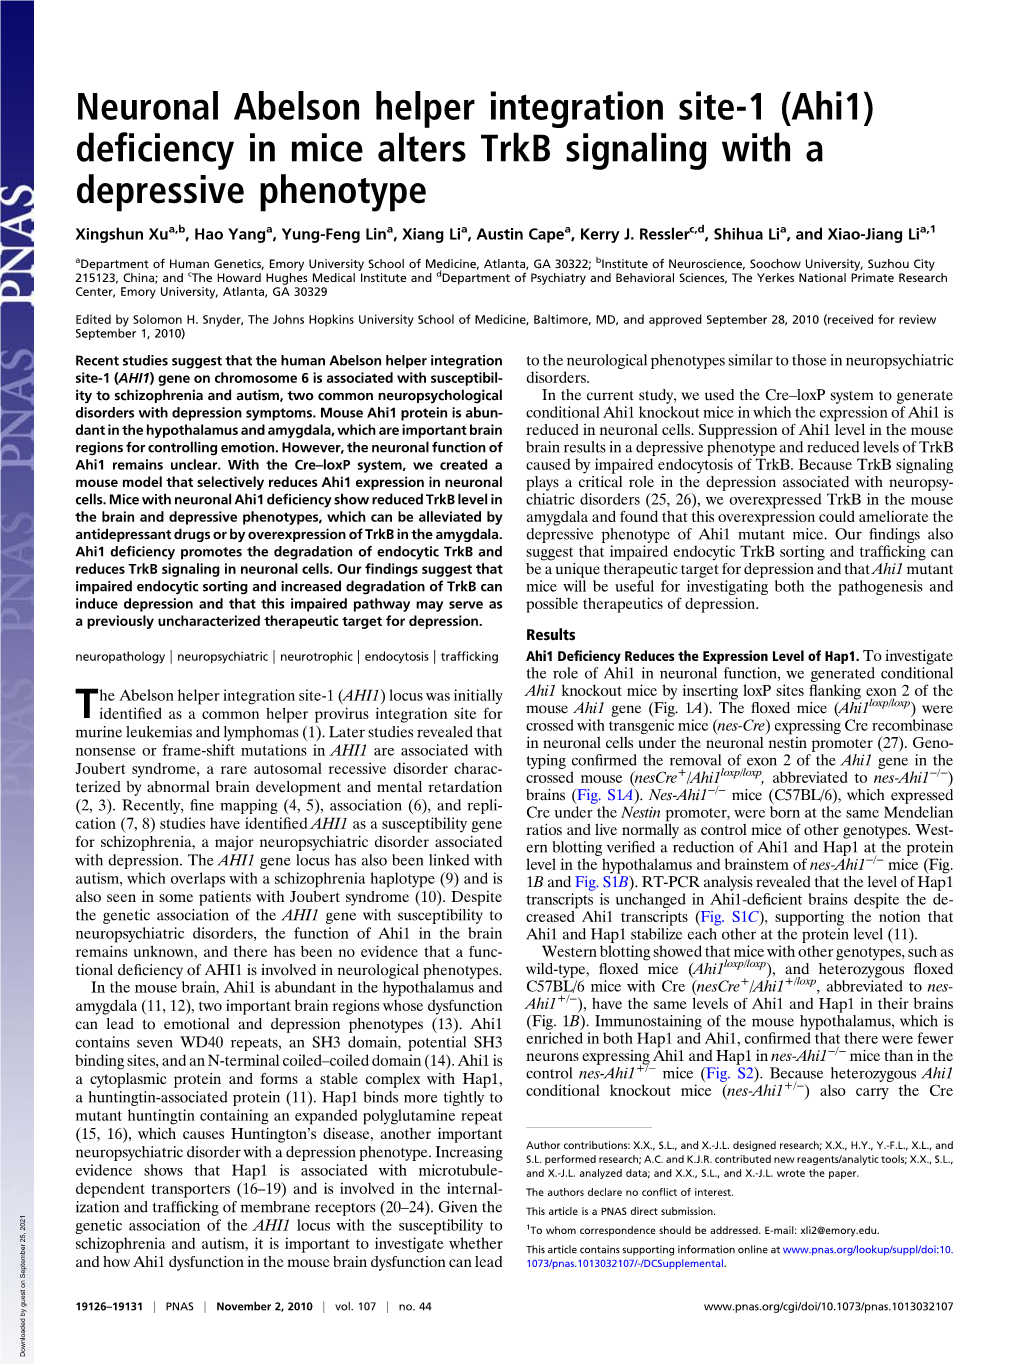 (Ahi1) Deficiency in Mice Alters Trkb Signaling with a Depressive